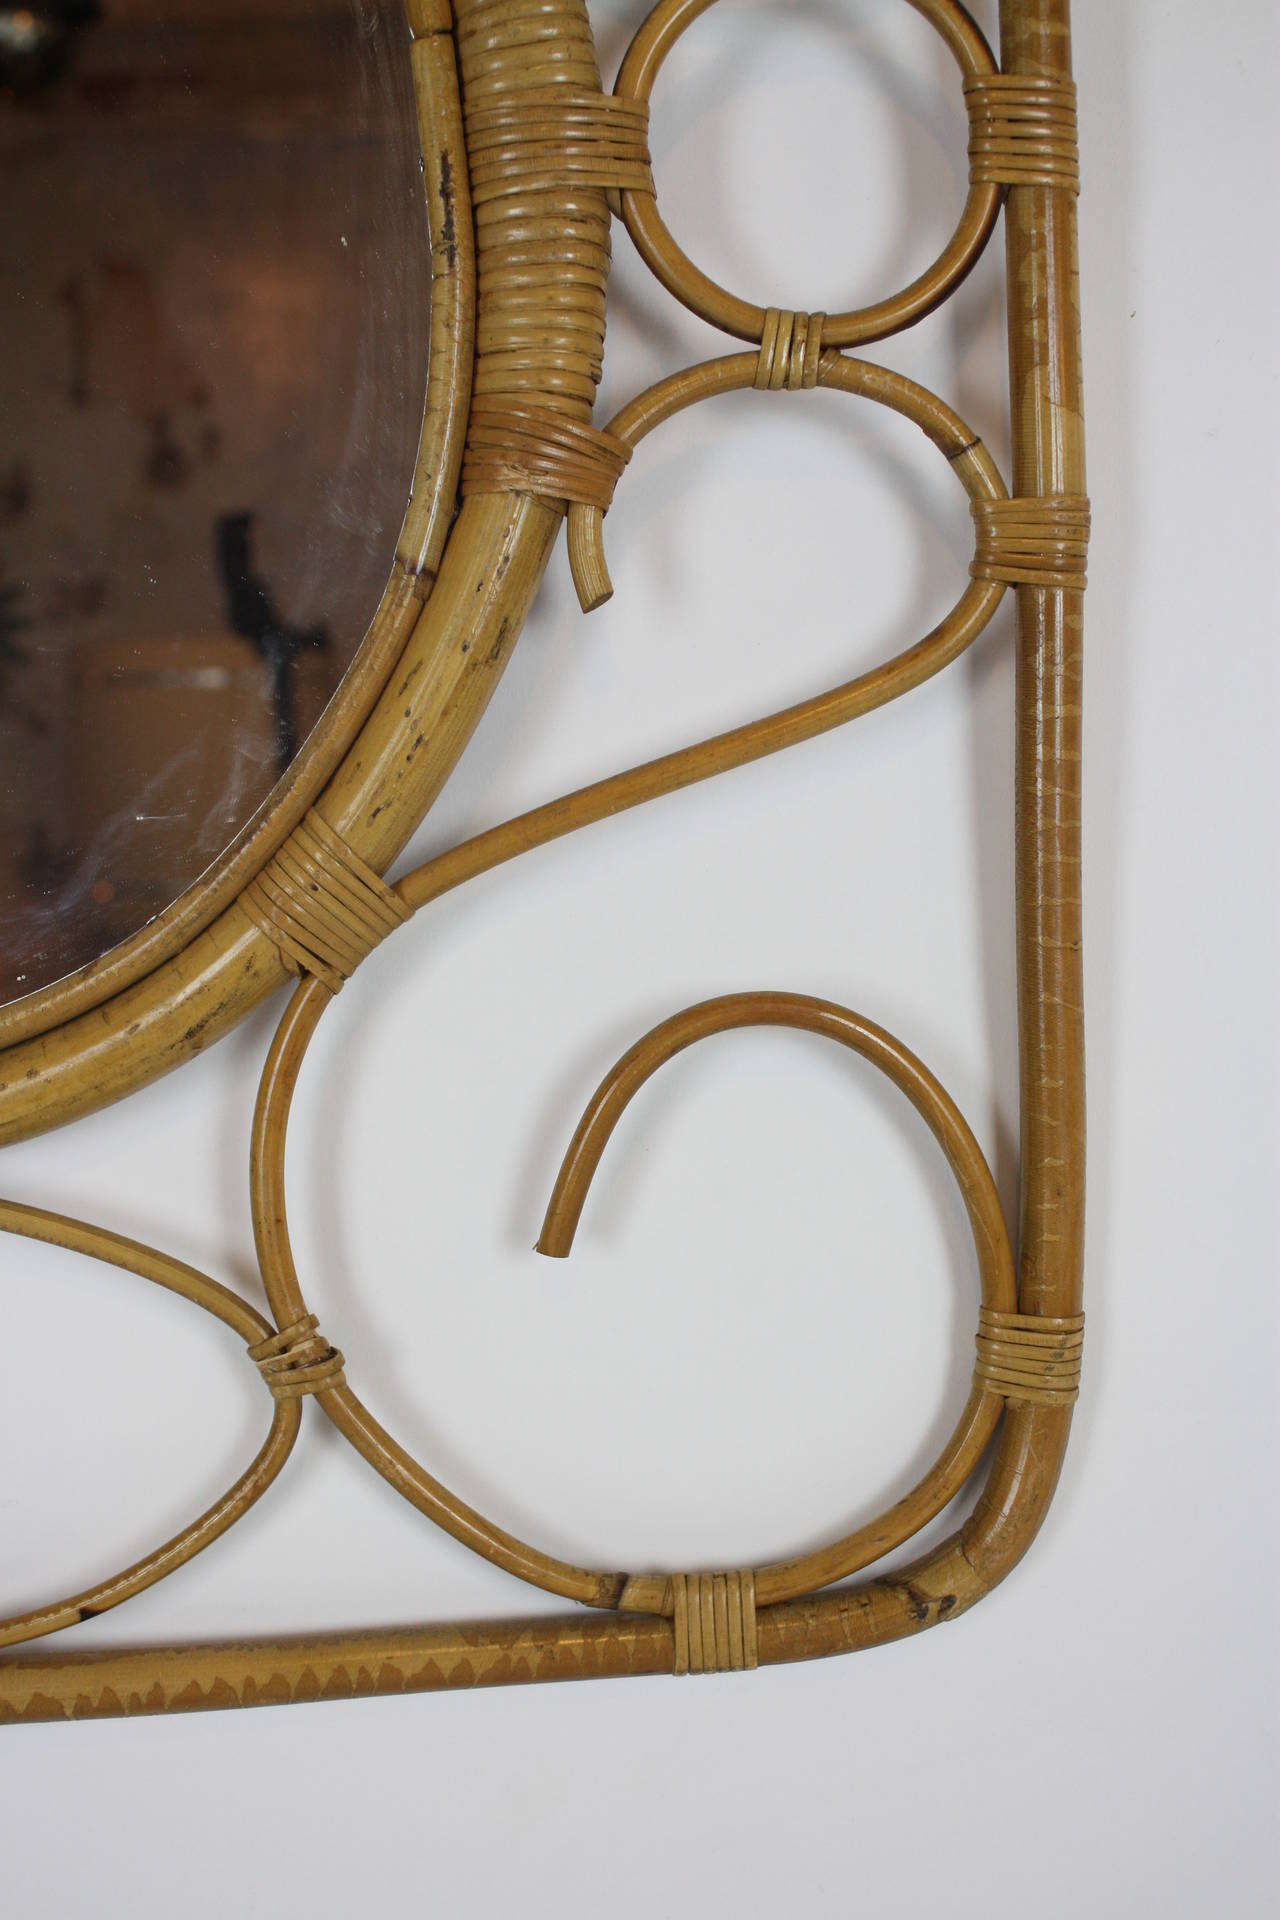 Artistic frame made with handcrafted rattan and surrounding an oval mirror